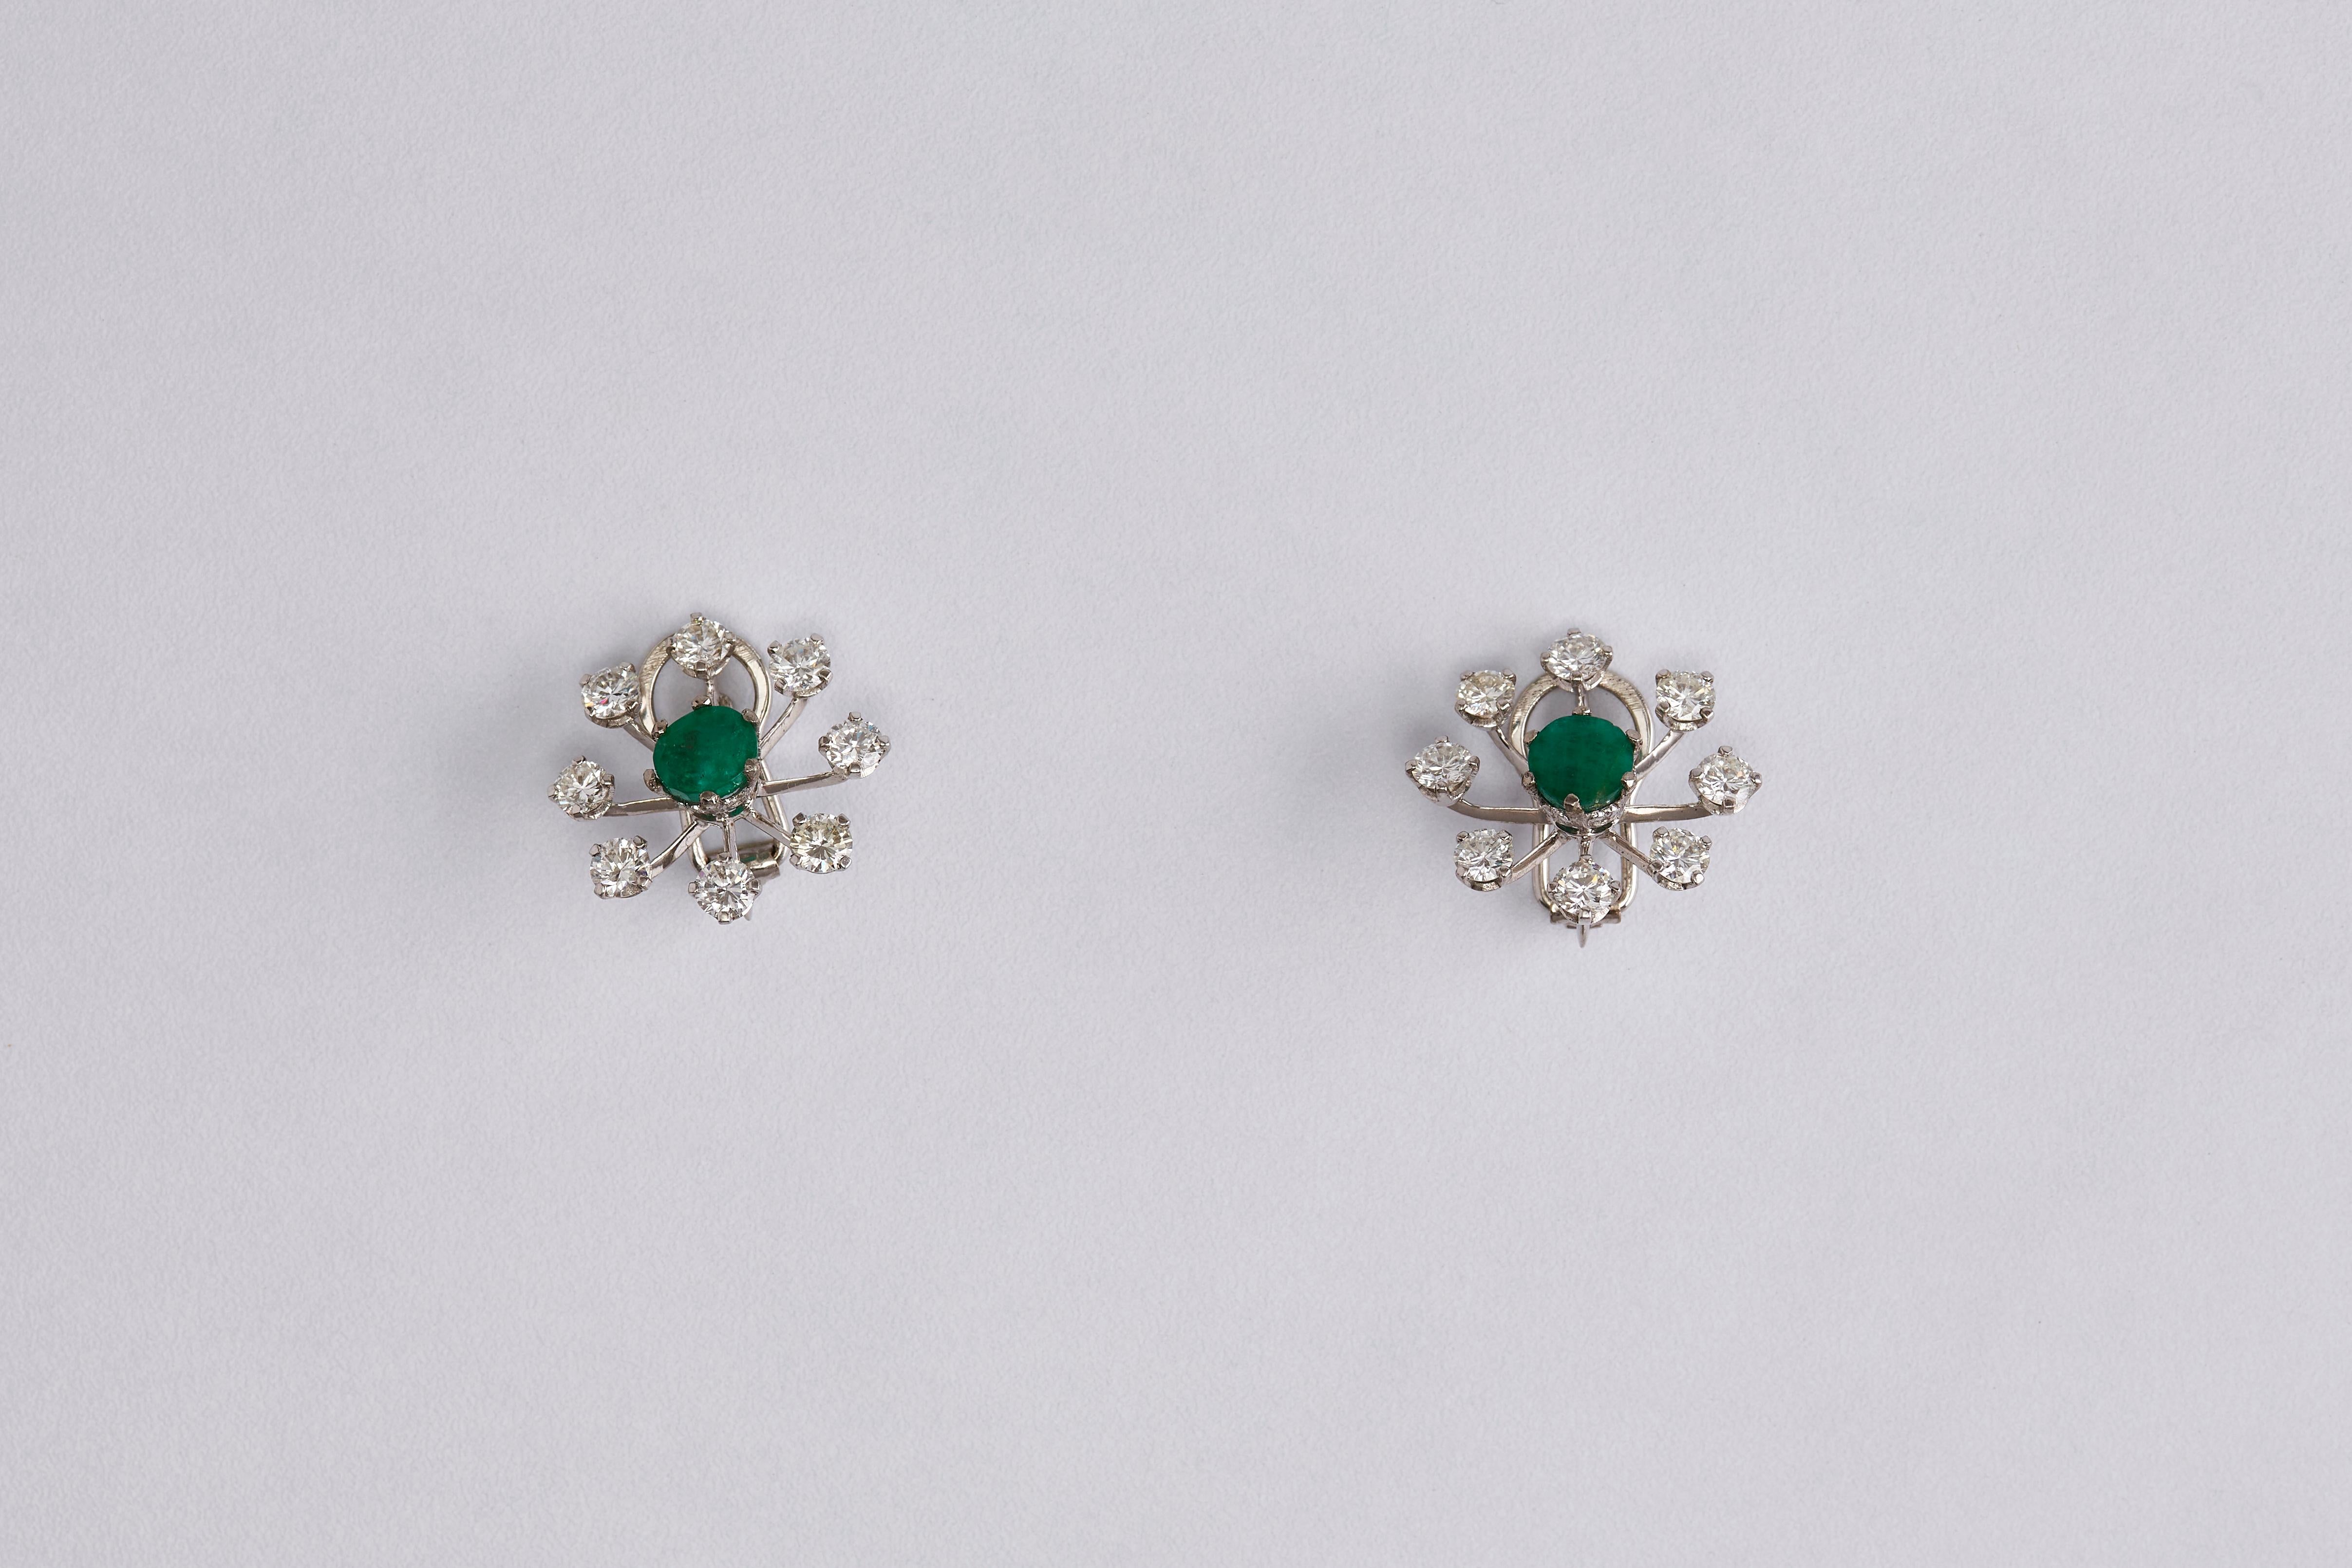 Pair of 18k White Gold Diamond and Emerald Flower Earrings In Excellent Condition For Sale In Tel Aviv, IL